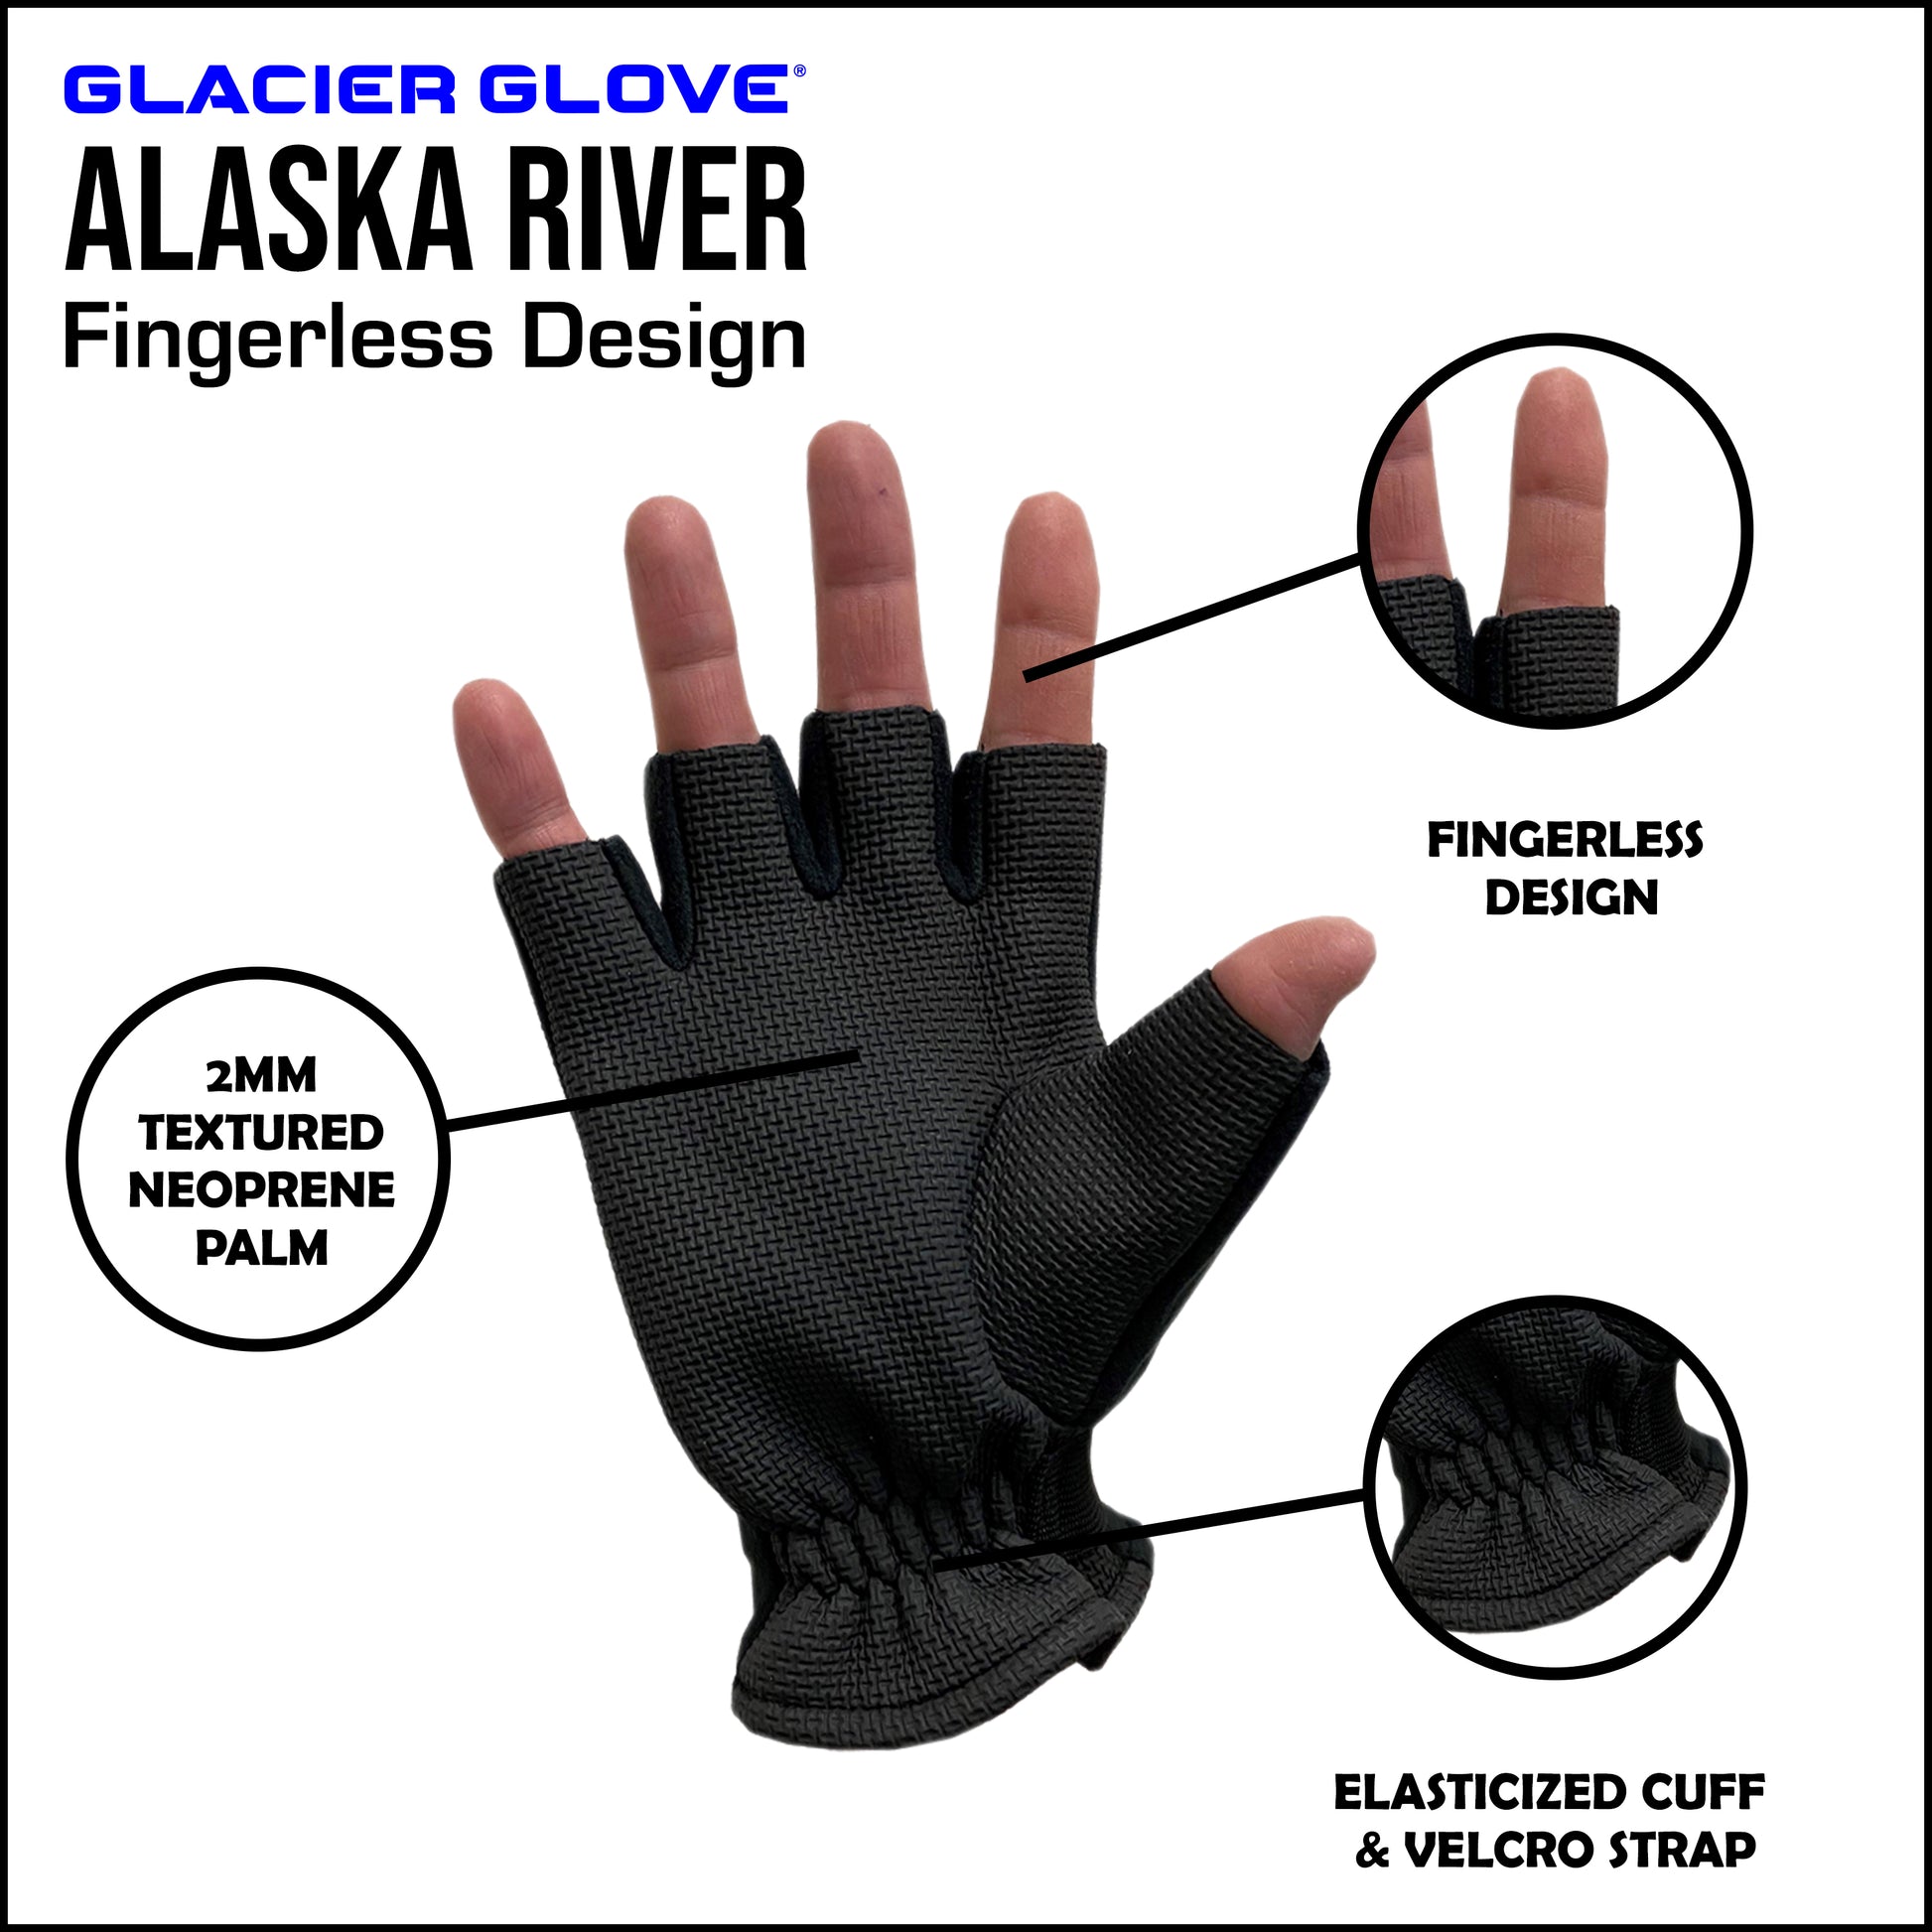 The Alaska River Glove is our best-selling fingerless glove. It provides the most versatile protection during cold and wet outdoor activities without giving up dexterity.